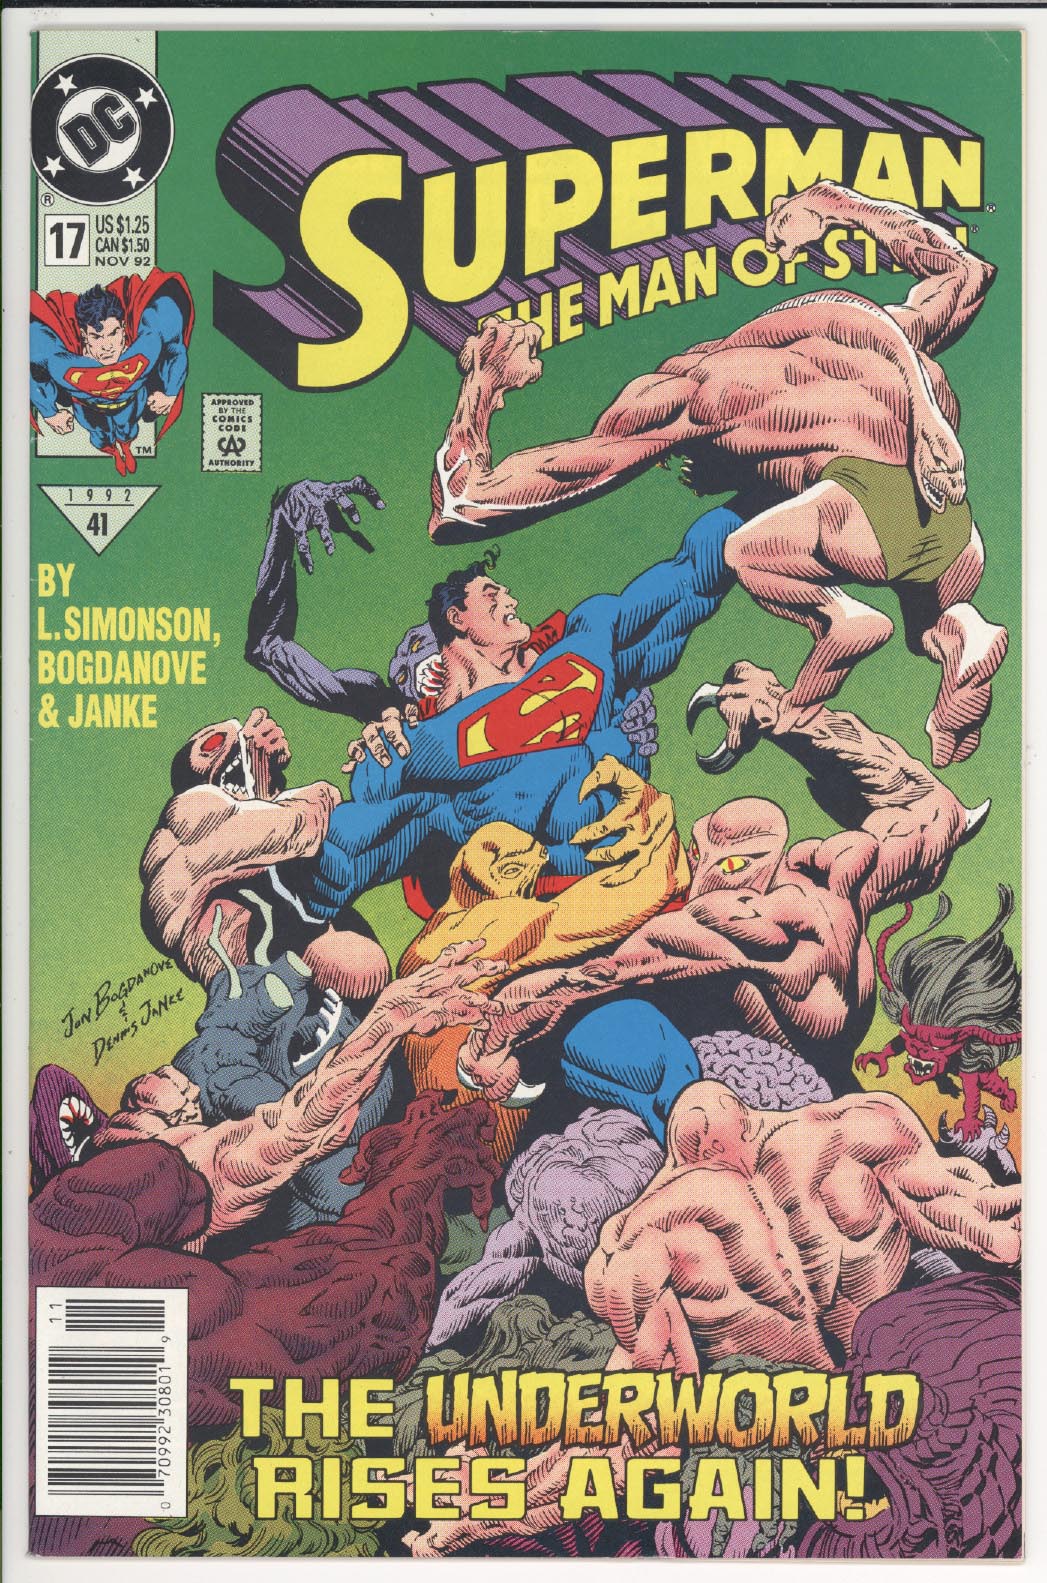 Superman The Man of Steel #17 front